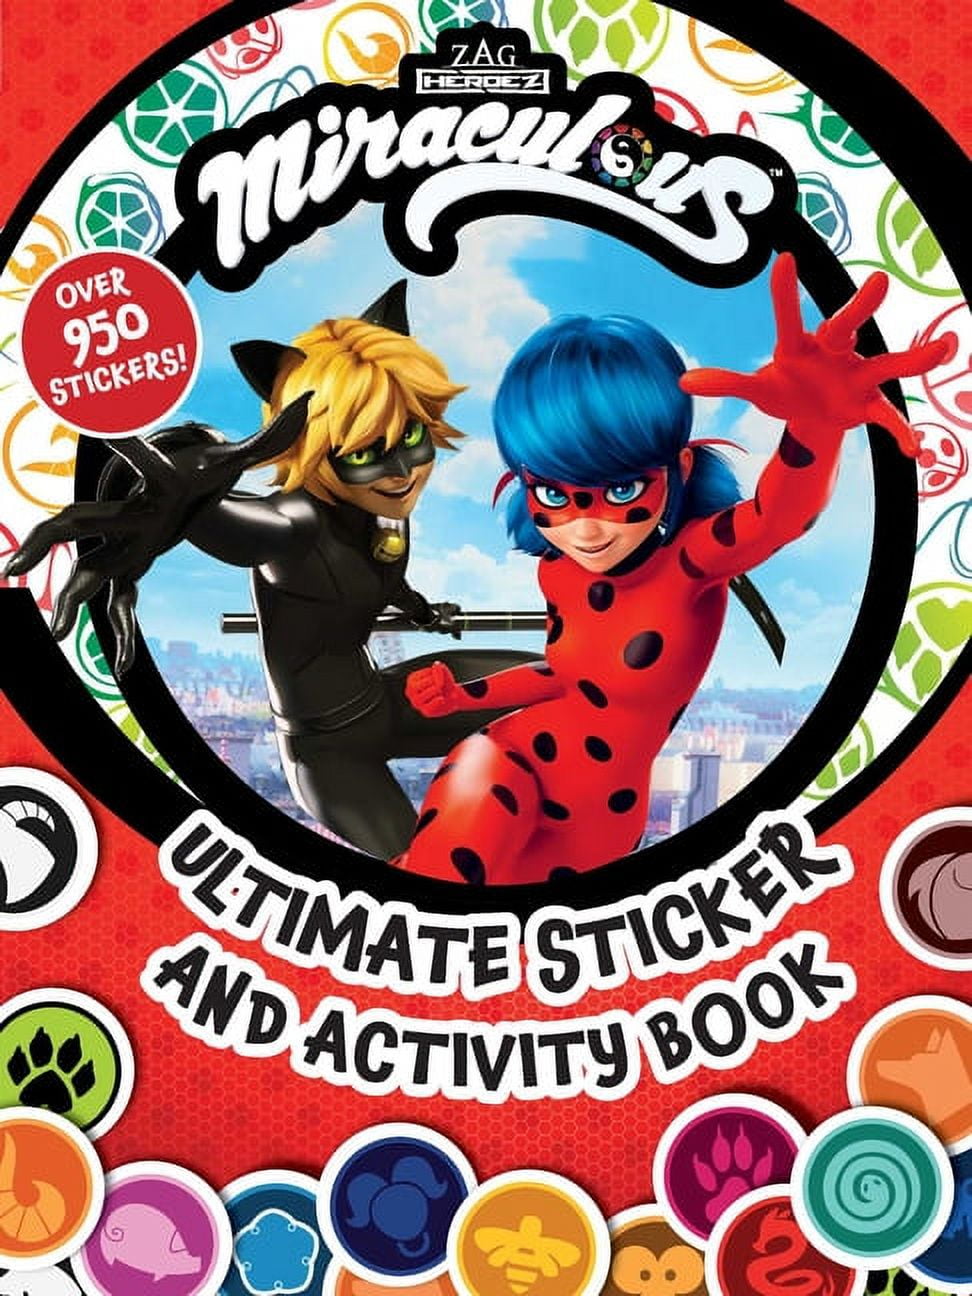 Miraculous: Ultimate Sticker and Activity Book: 100% Official Tales of  Ladybug & Cat Noir, as seen on Disney and Netflix!|Paperback